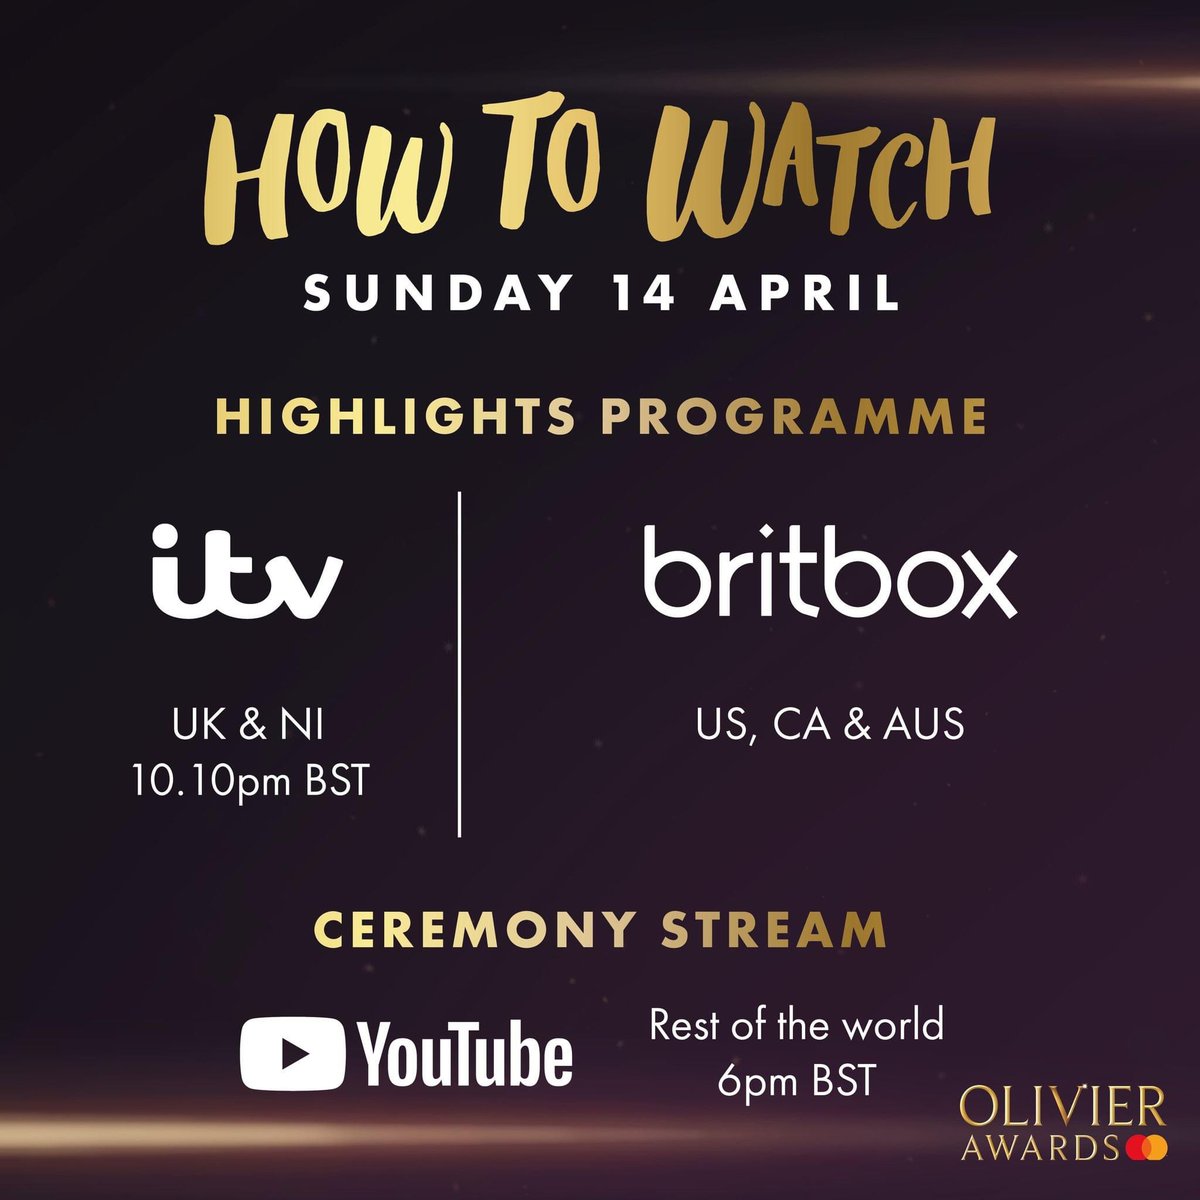 How to watch the @olivierawards tonight 

#theatre #theatrenews #theatrefan #theatrekid #olivierawards #london #londontheatre